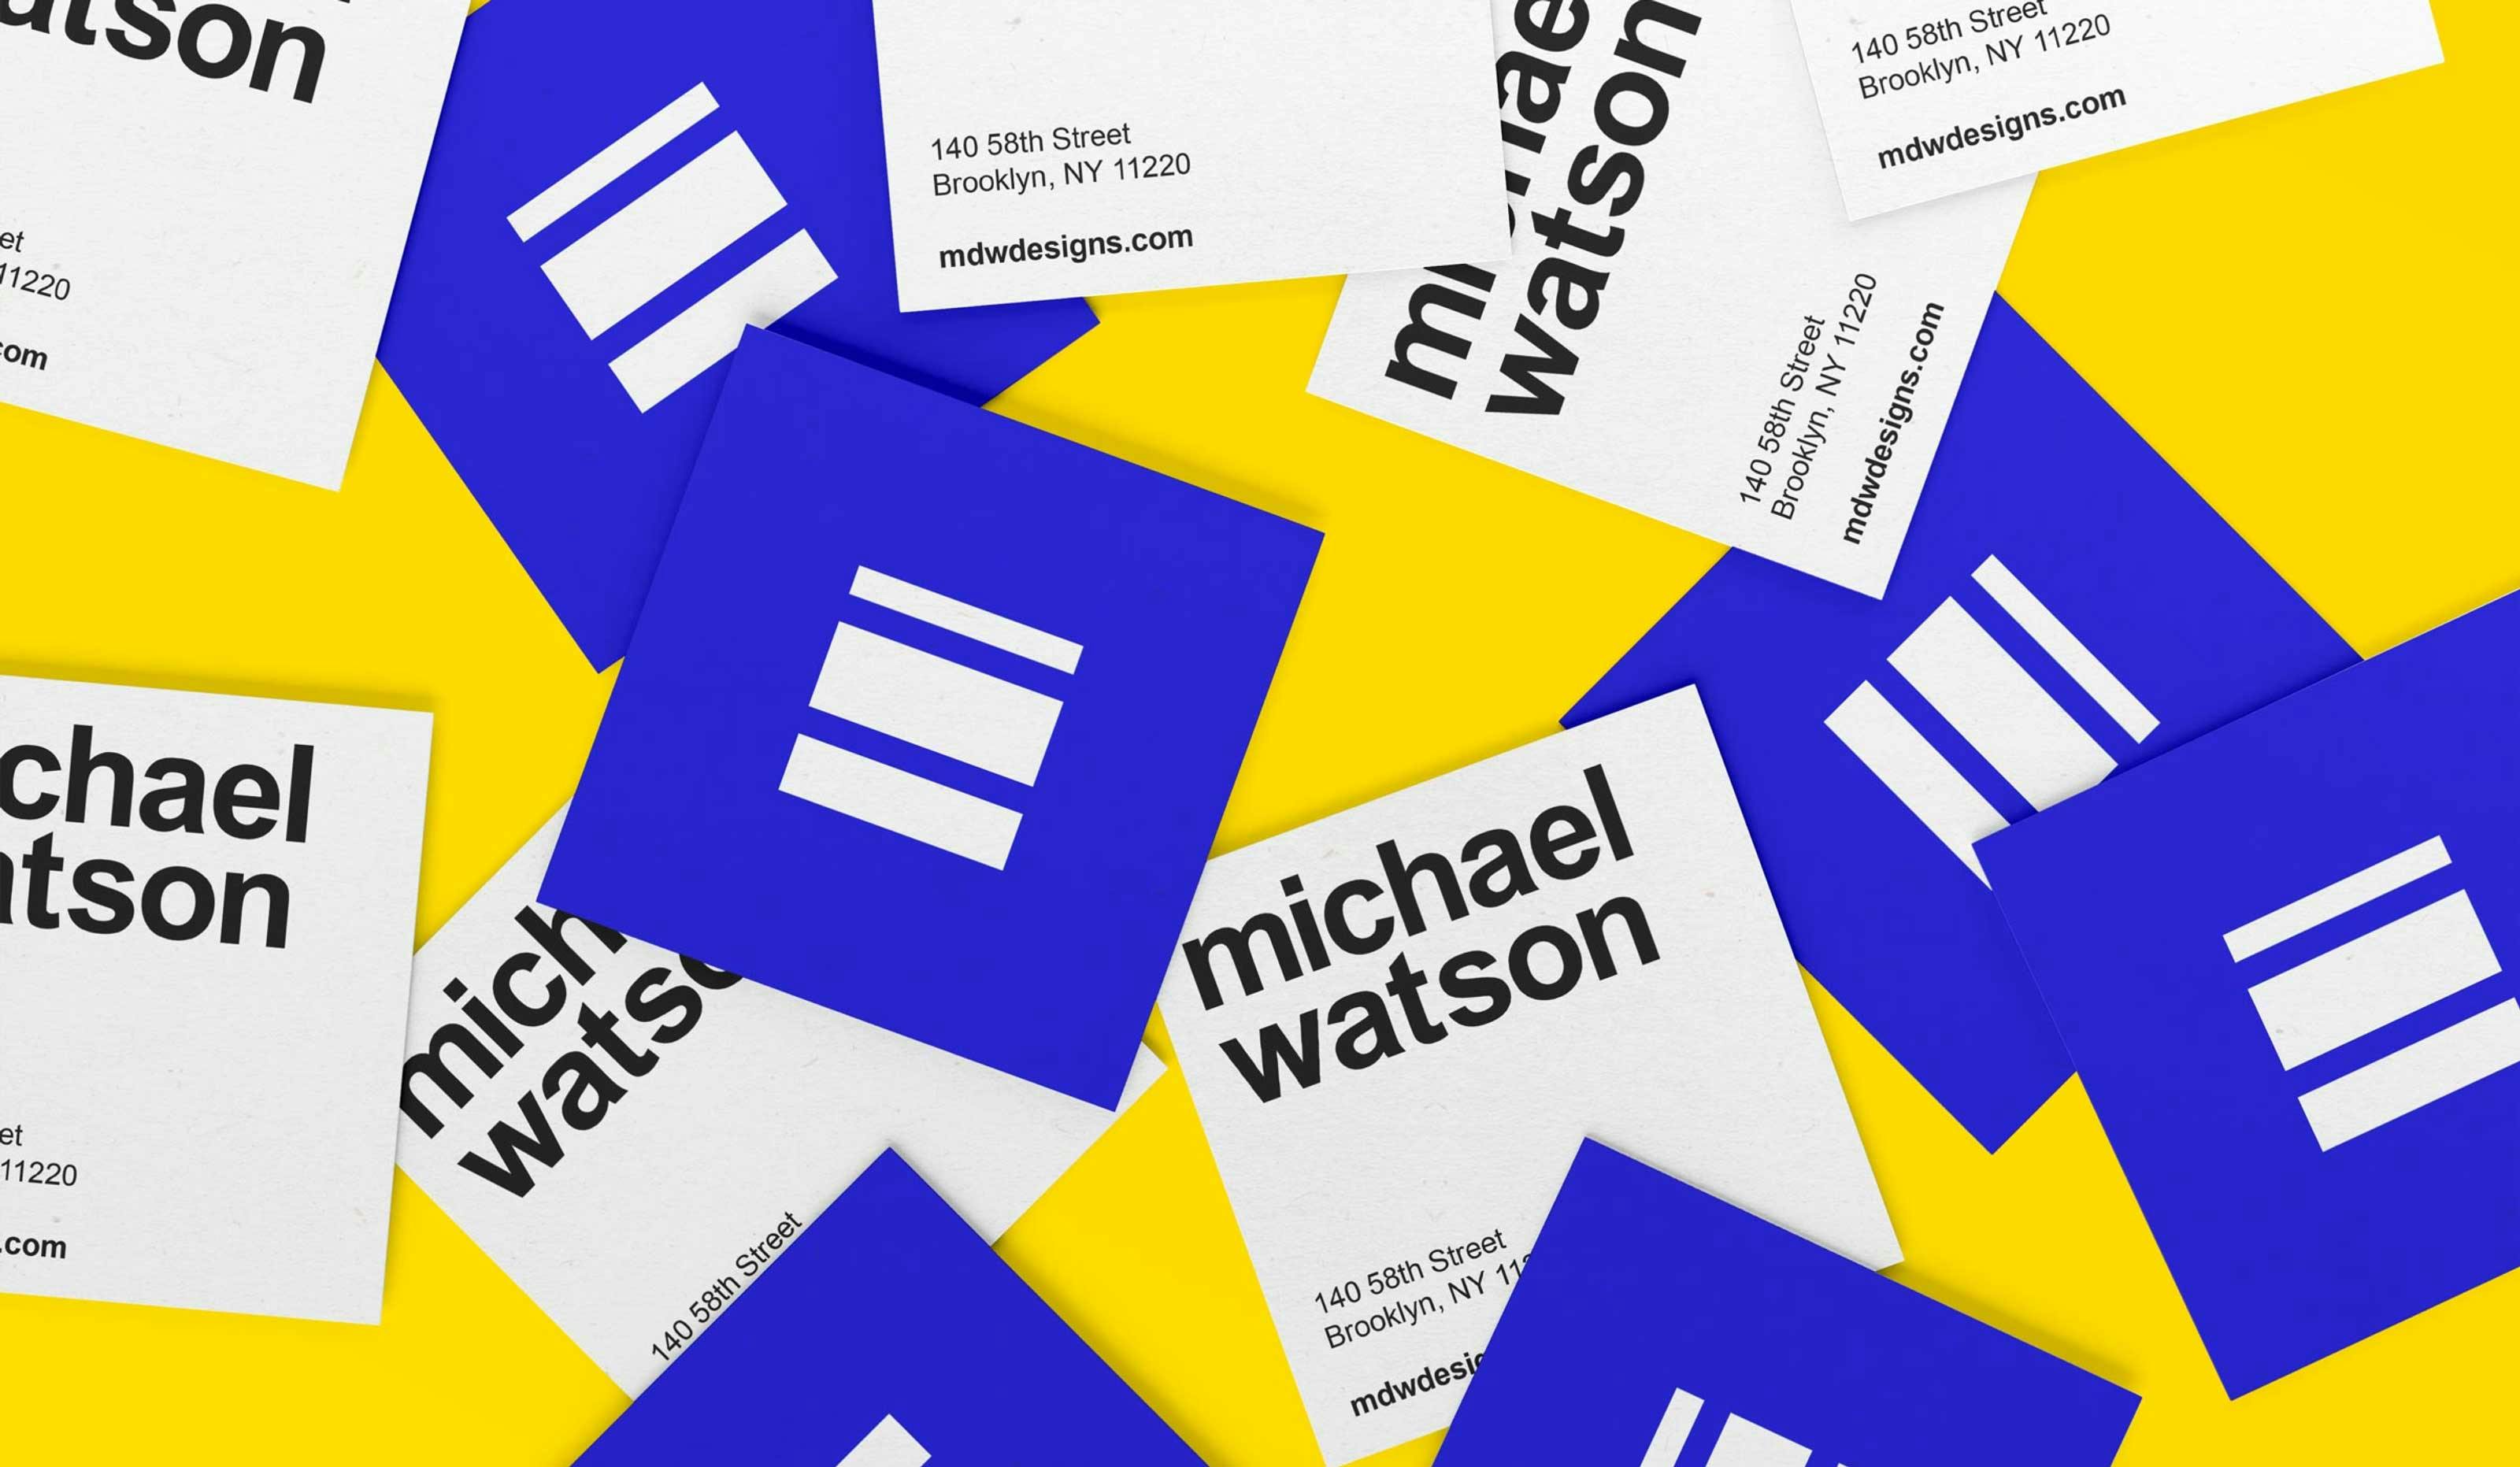 Business-cards-scattered-showing-fine-artist-logo-in-blue-and-yellow-colors-based-in-New-York-City.jpg